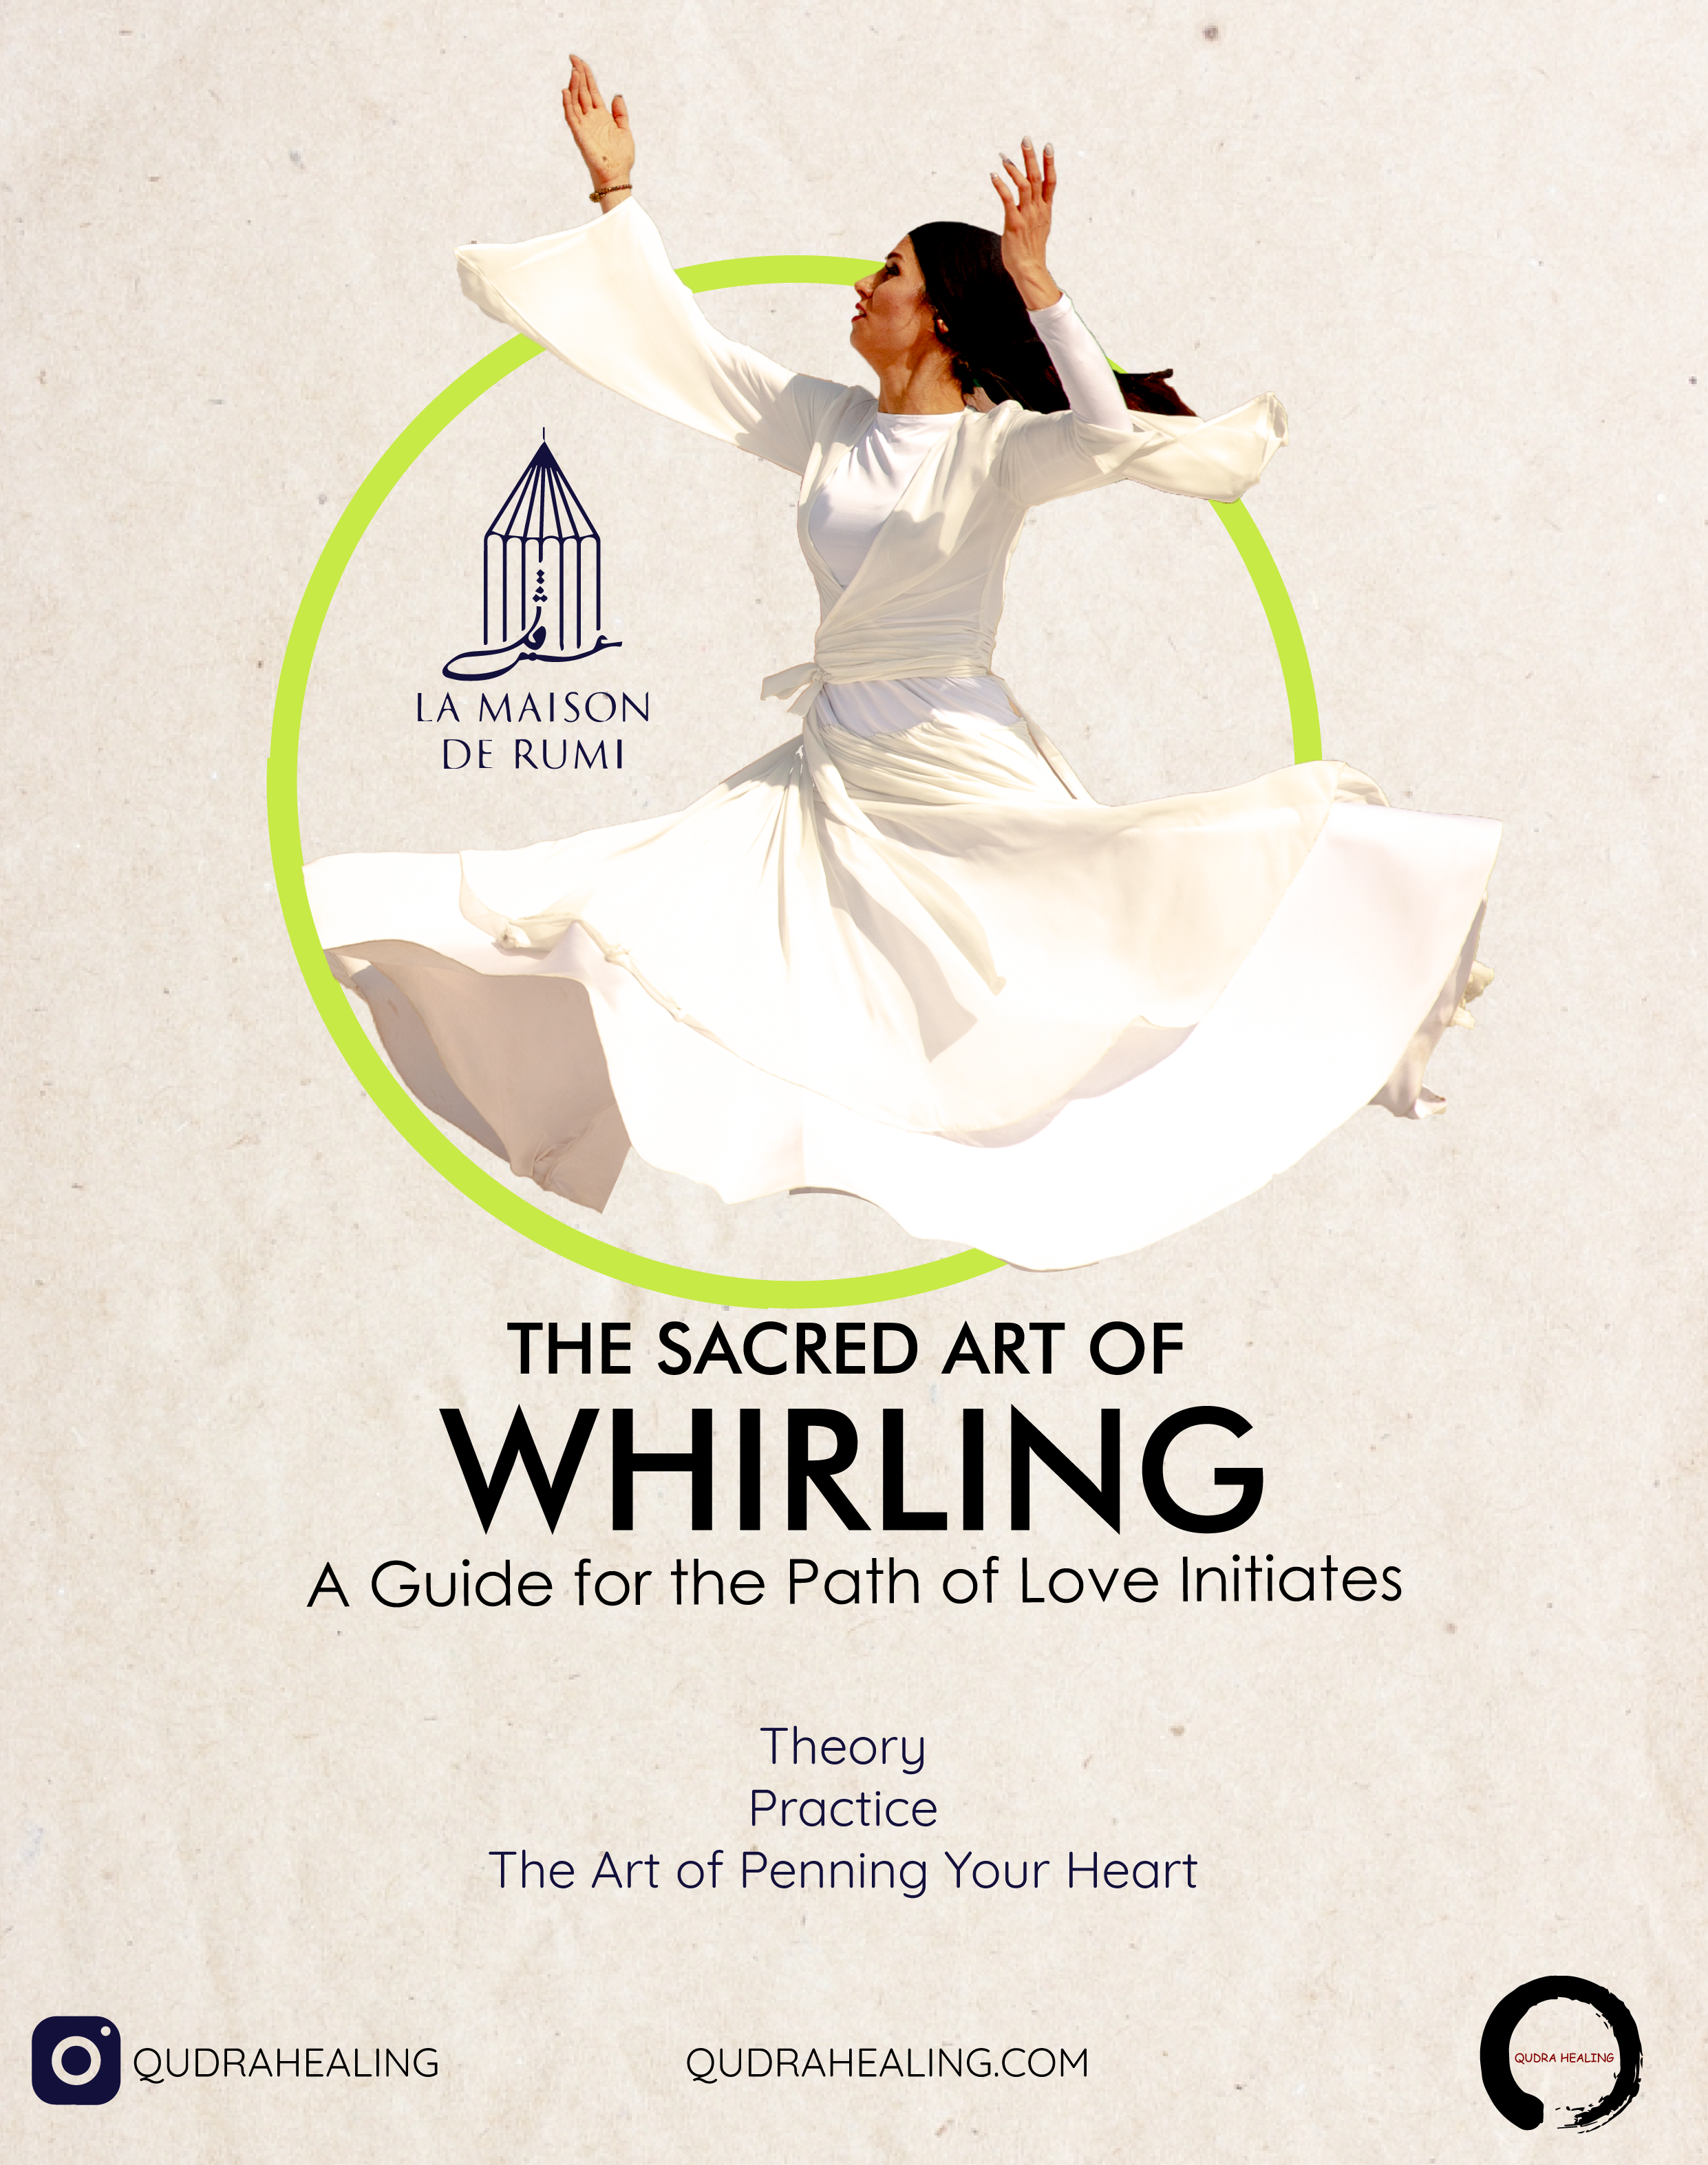 The Sacred Art of Whirling & Penning Your Heart